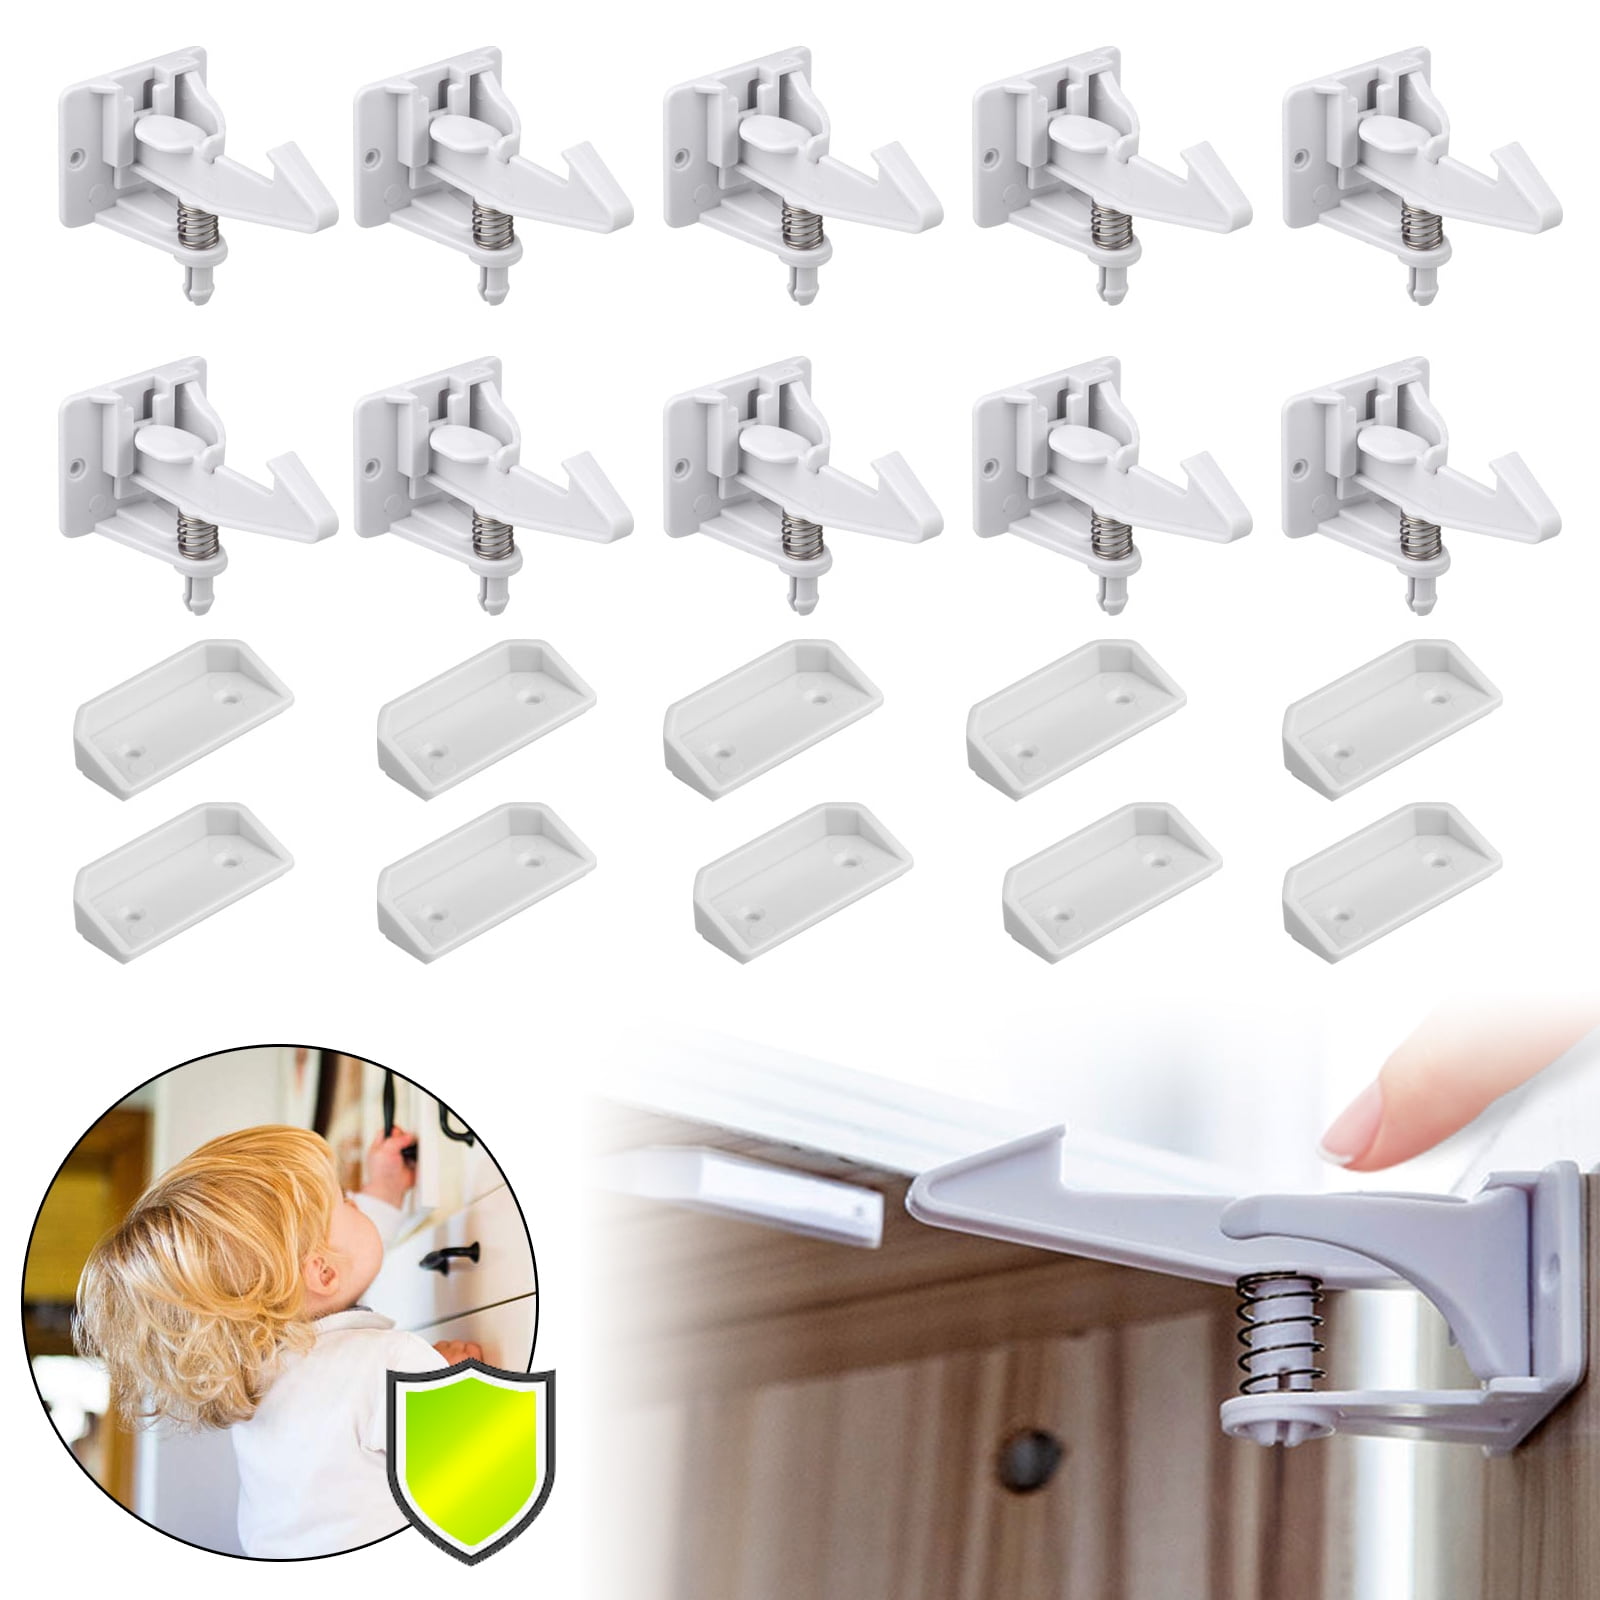 Magnetic Cabinet Locks Child Safety 41-Piece Kit with New Upgraded Adhesive  [12 Magnet Locks 2 Keys 4 Corner Guards] Easy Installation No-Drill Baby  Proofing Locks to Childproof Cabinets & Drawers - Yahoo Shopping